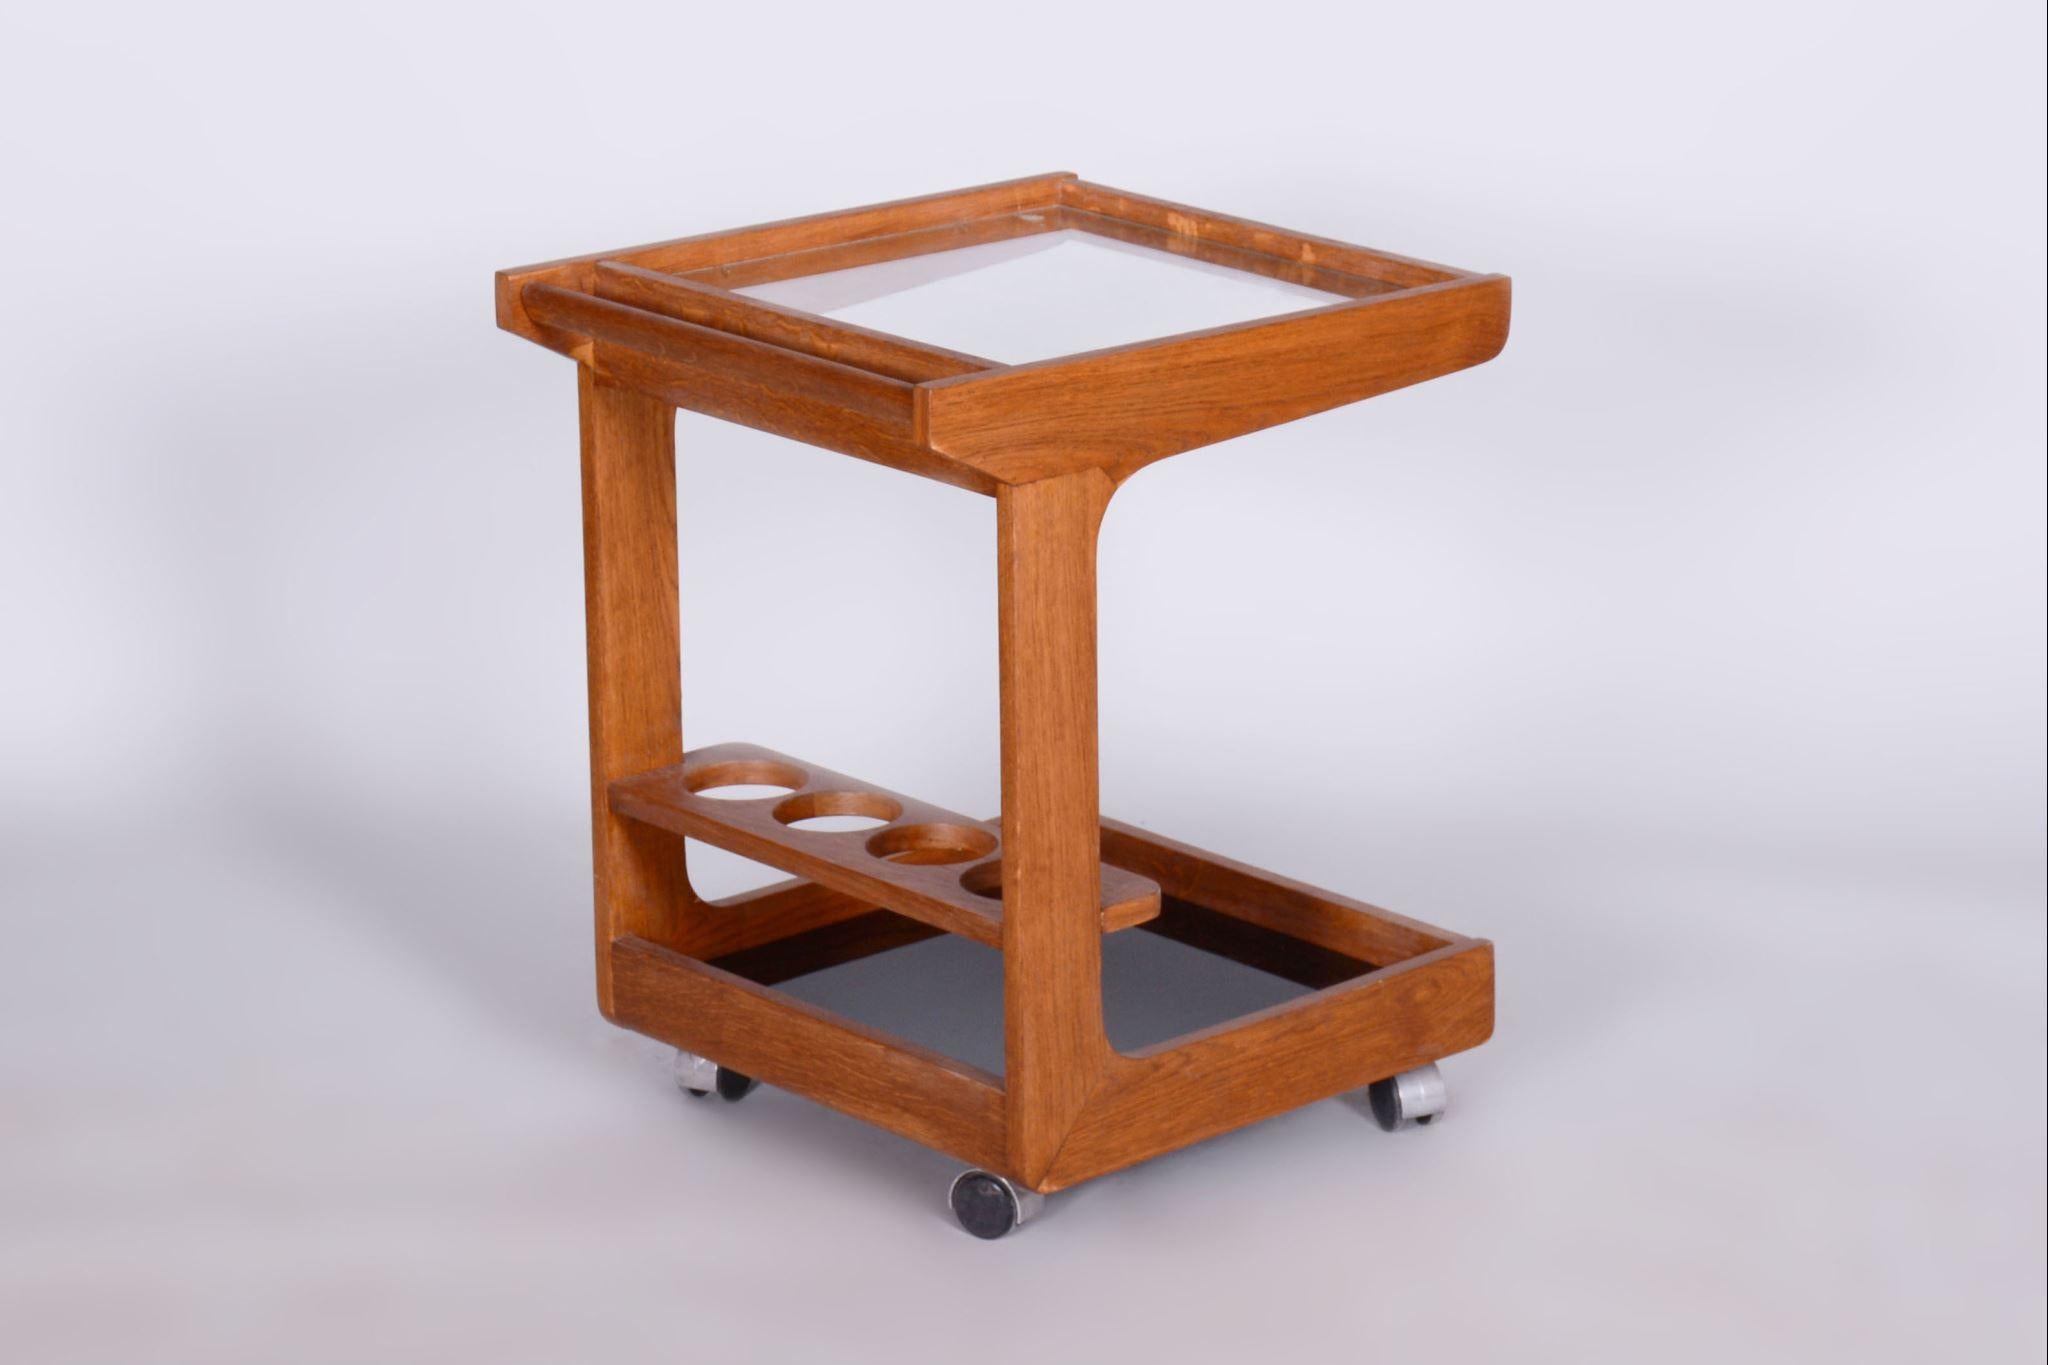 Restored Midcentury Trolley, Mahogany, Glass, Revived Polish, Czechia, 1960s For Sale 3